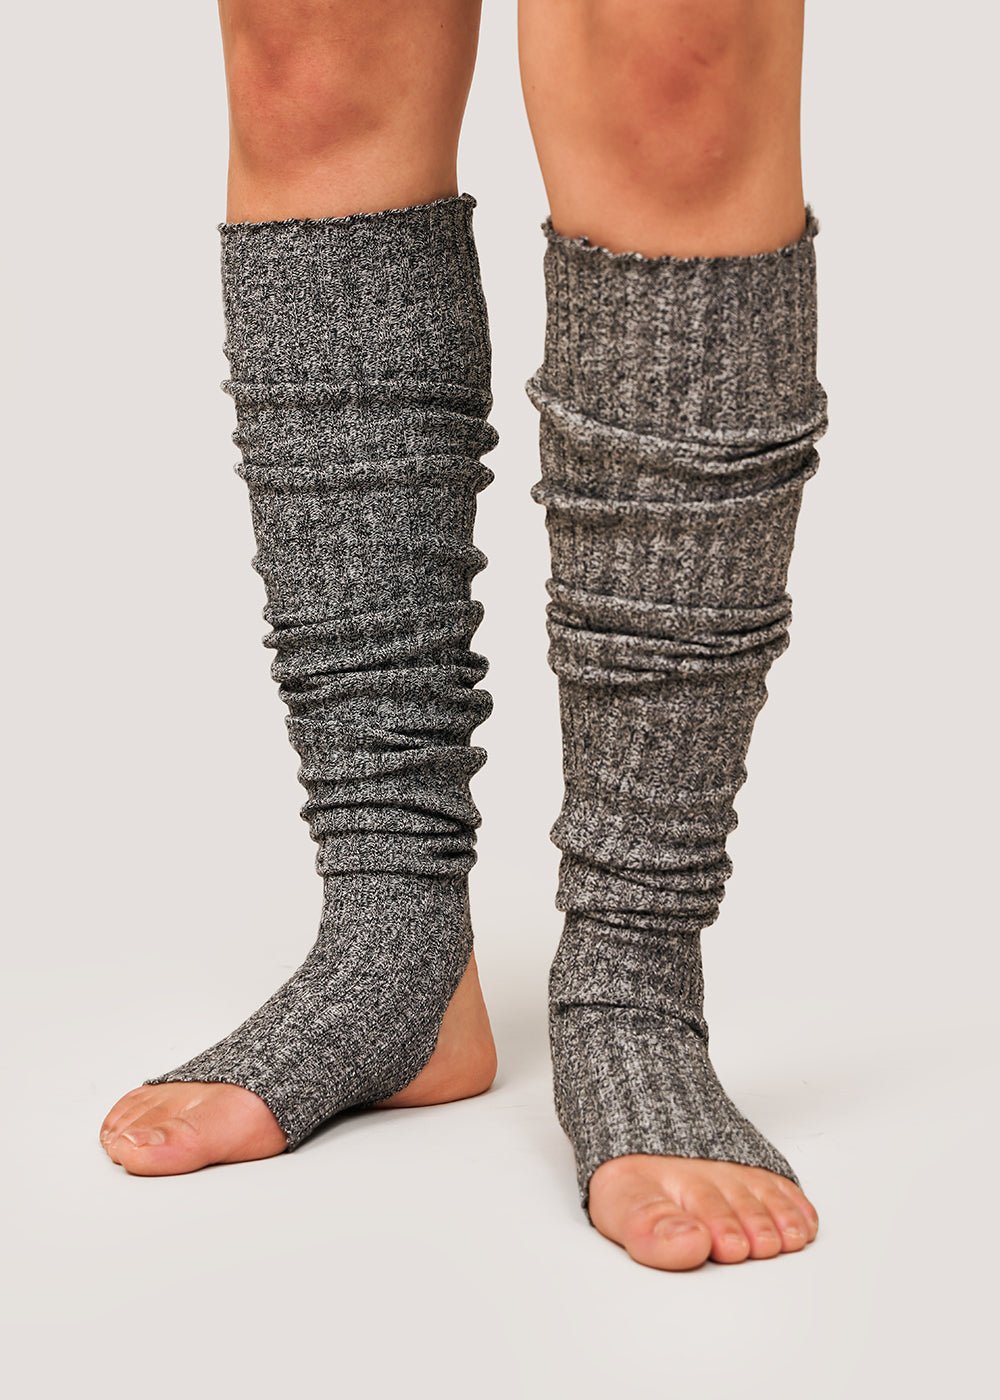 Fair Isle Leg Warmers Finely Knitted Nordic Star Pattern White and Grey  Combination -  Canada